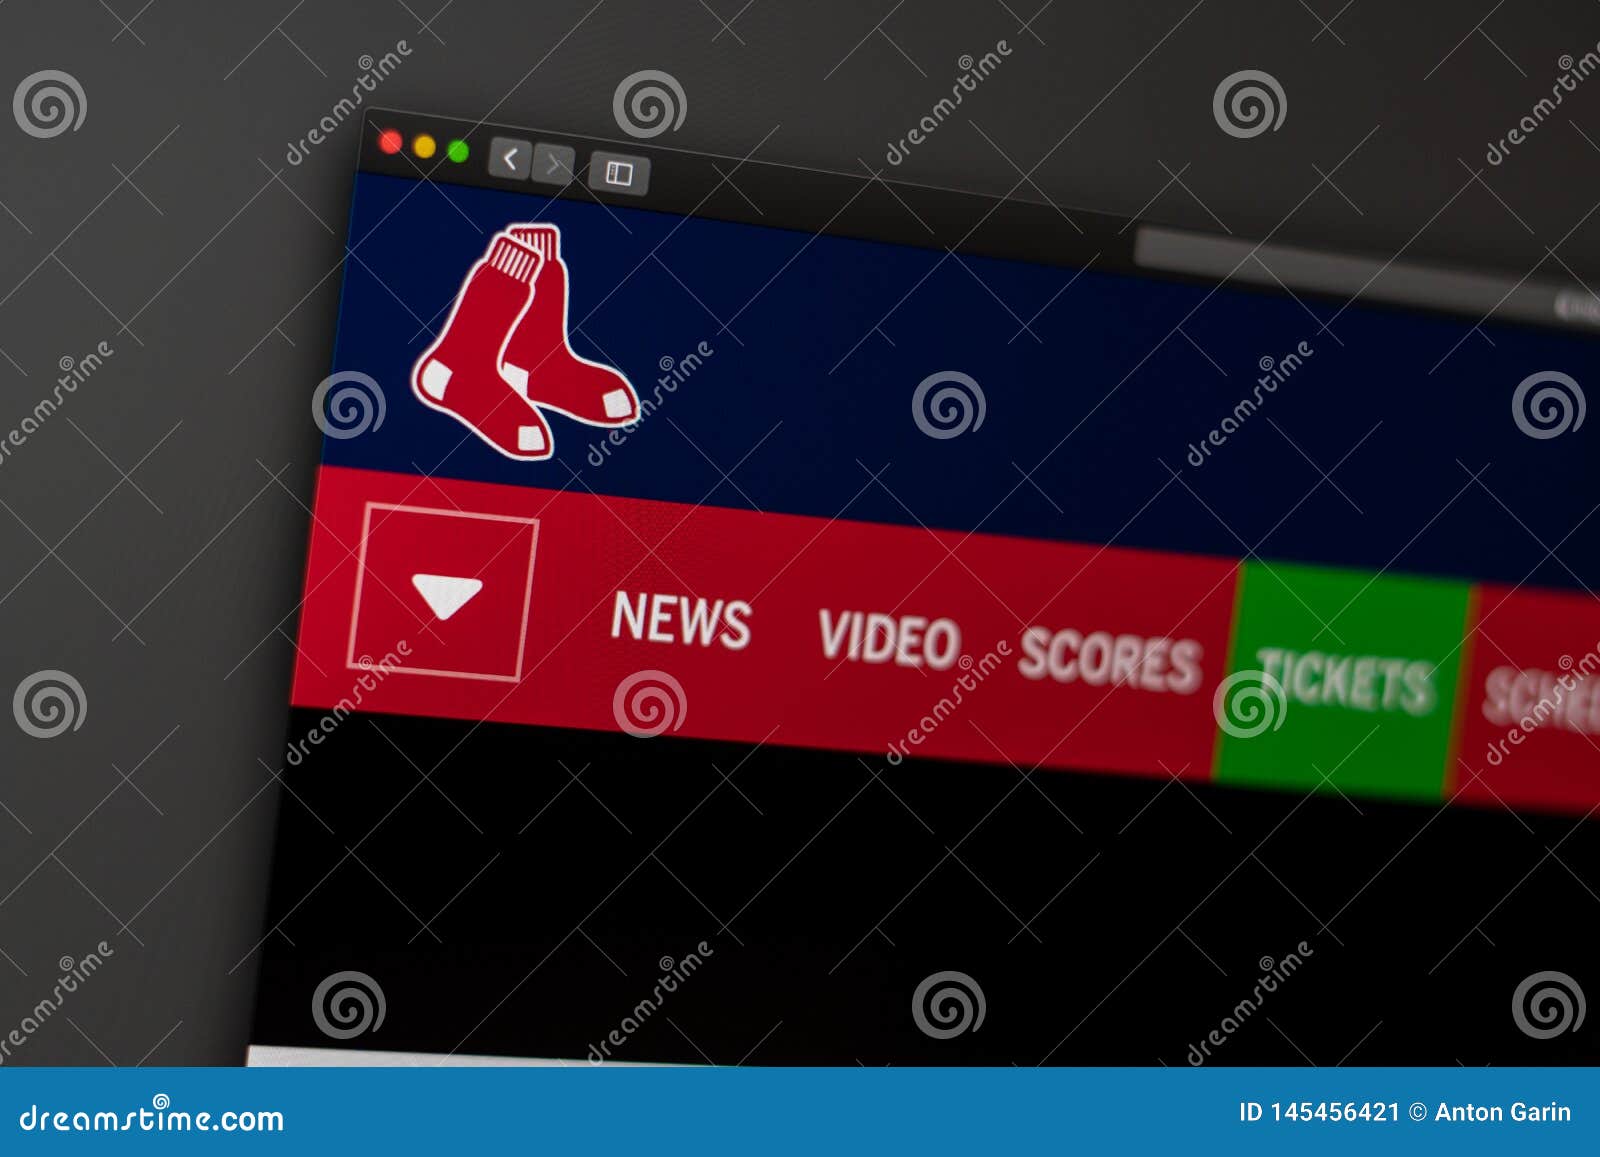 Official Boston Red Sox Website